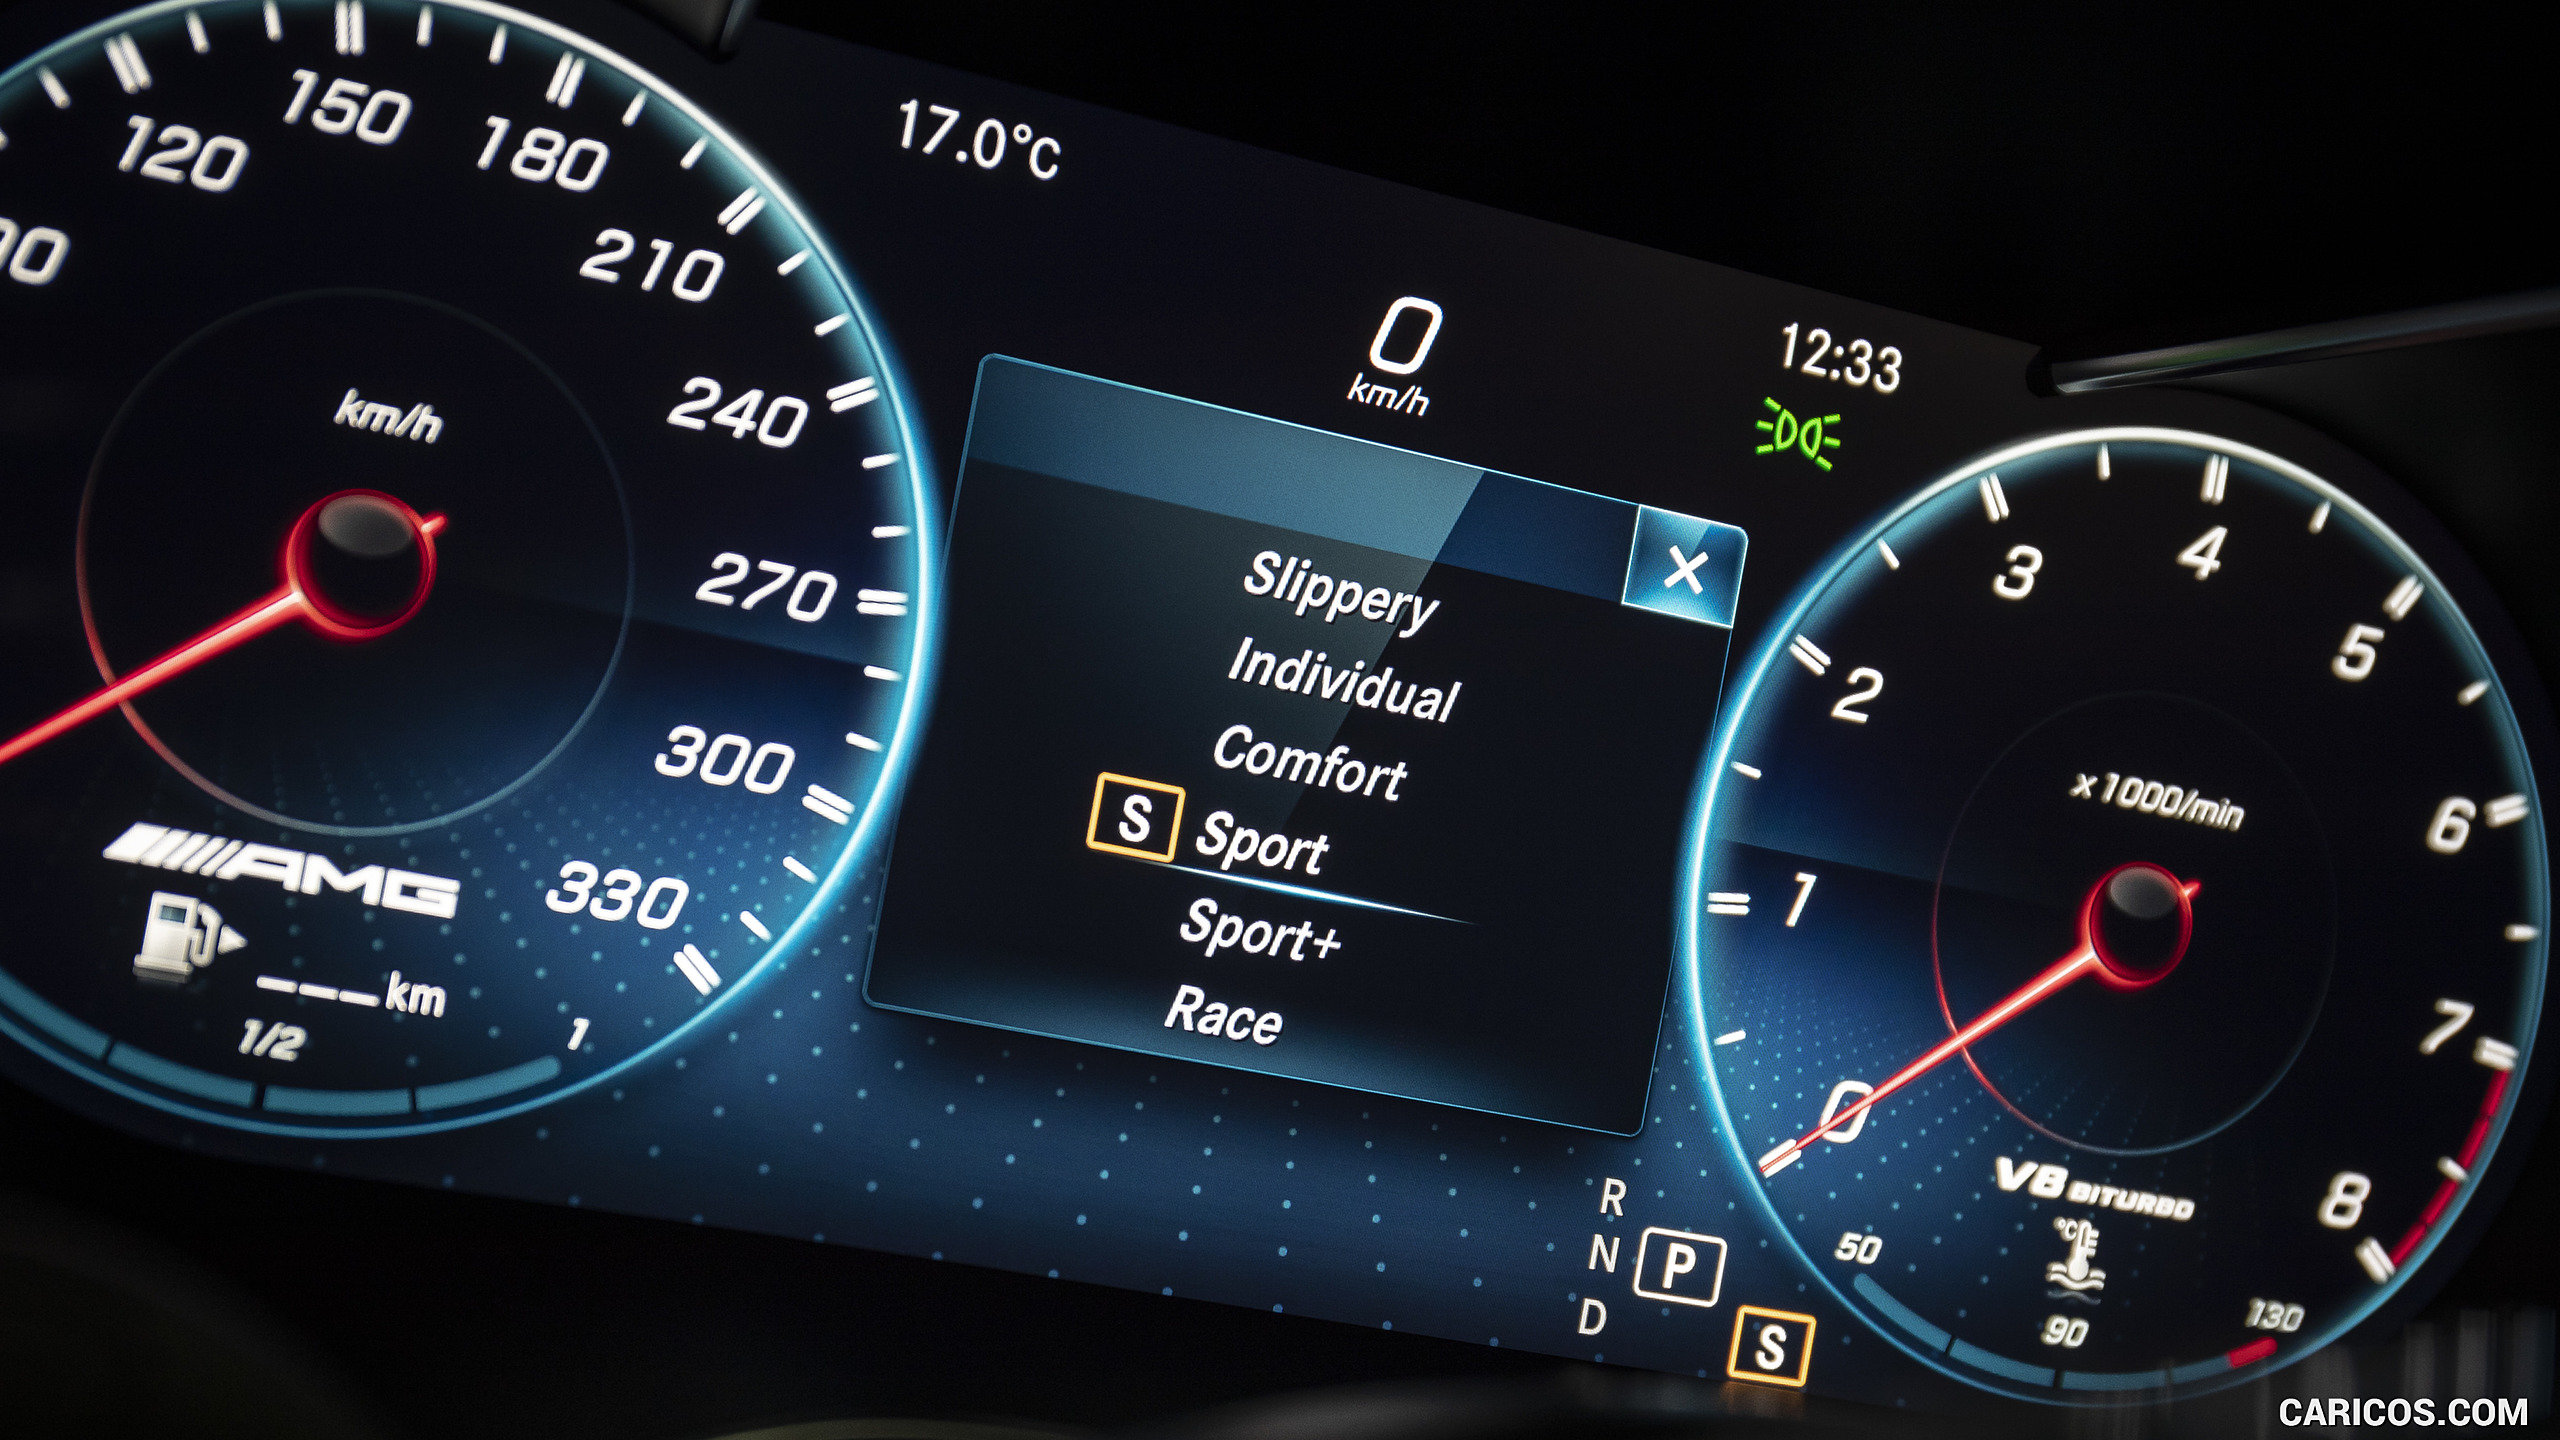 2019 Mercedes-AMG C 63 S Coupe - Digital Instrument Cluster, #99 of 106